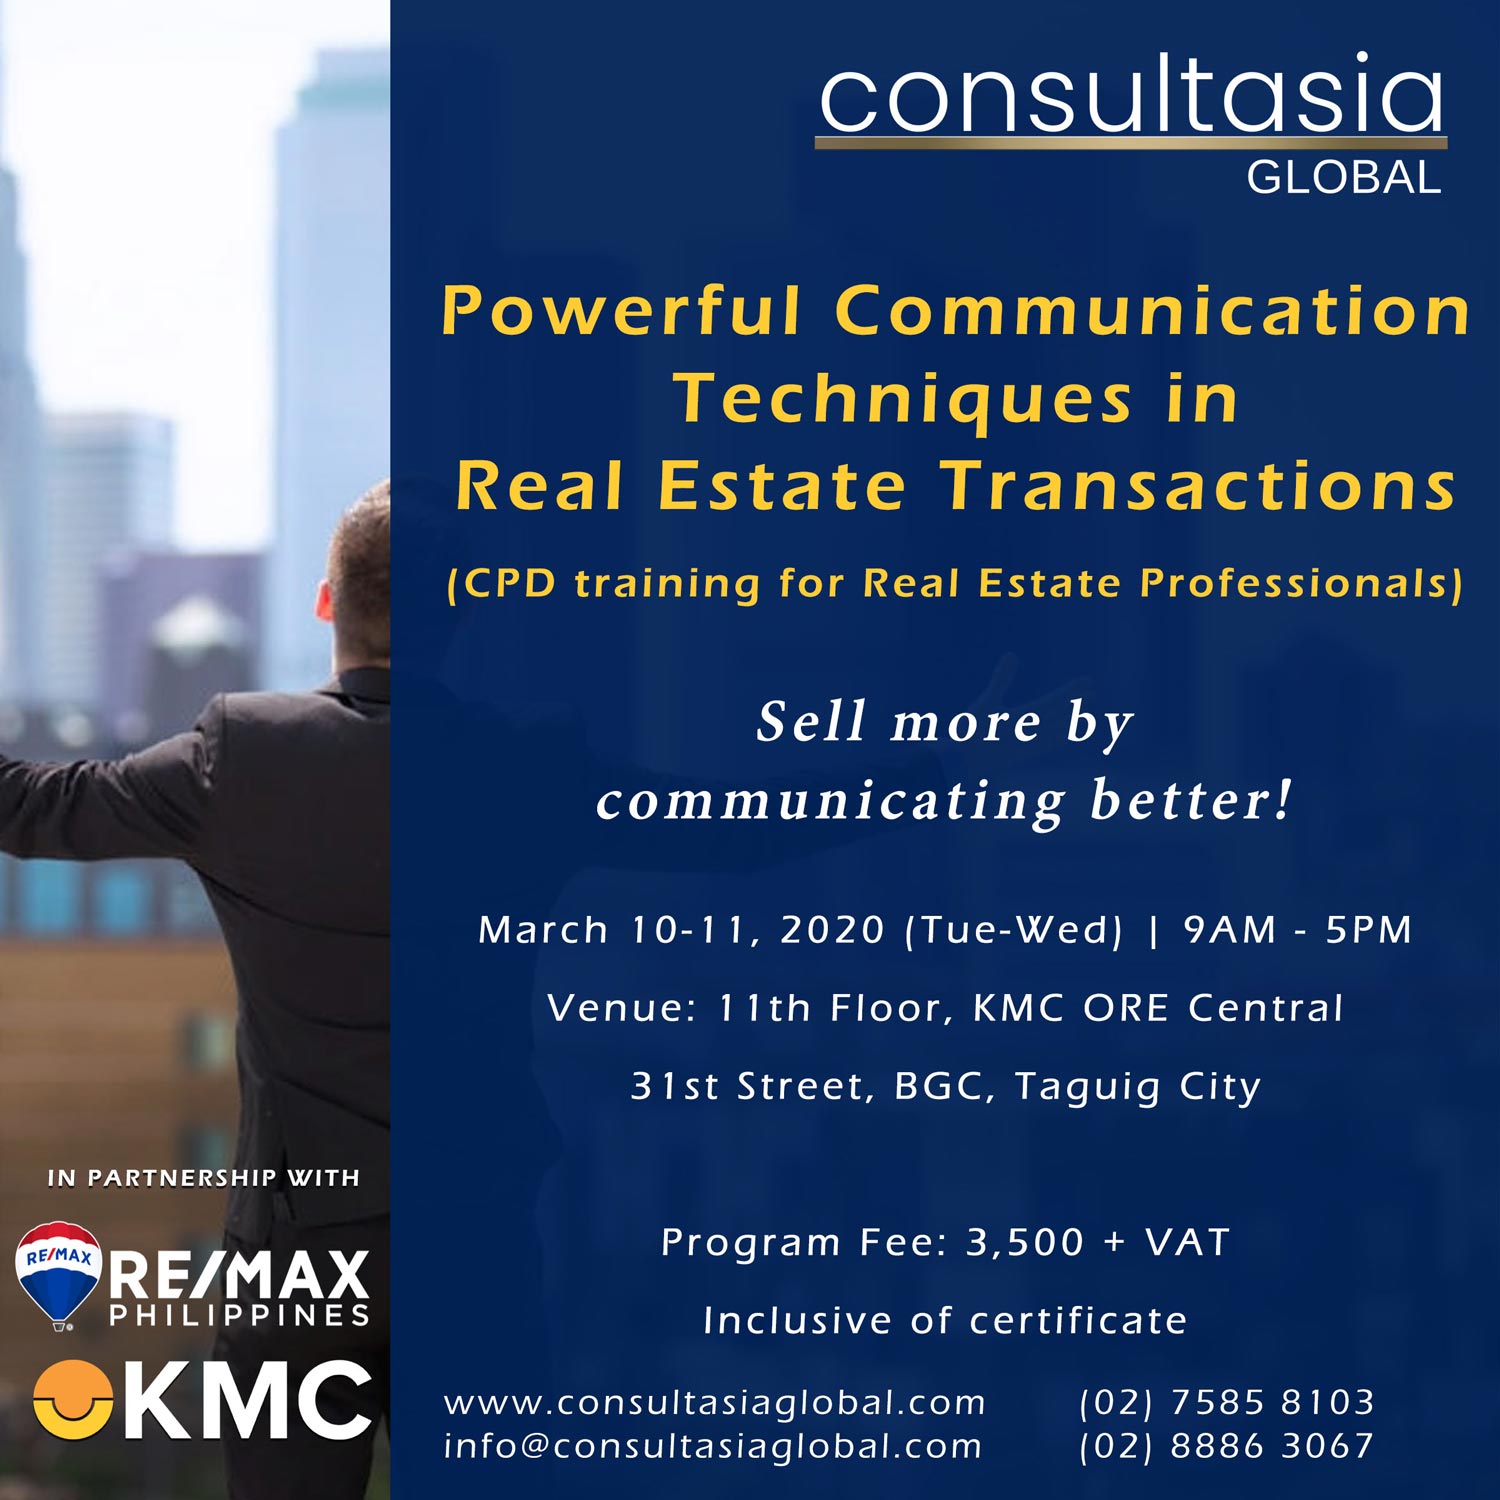 Powerful Communication Techniques in Real Estate Transactions